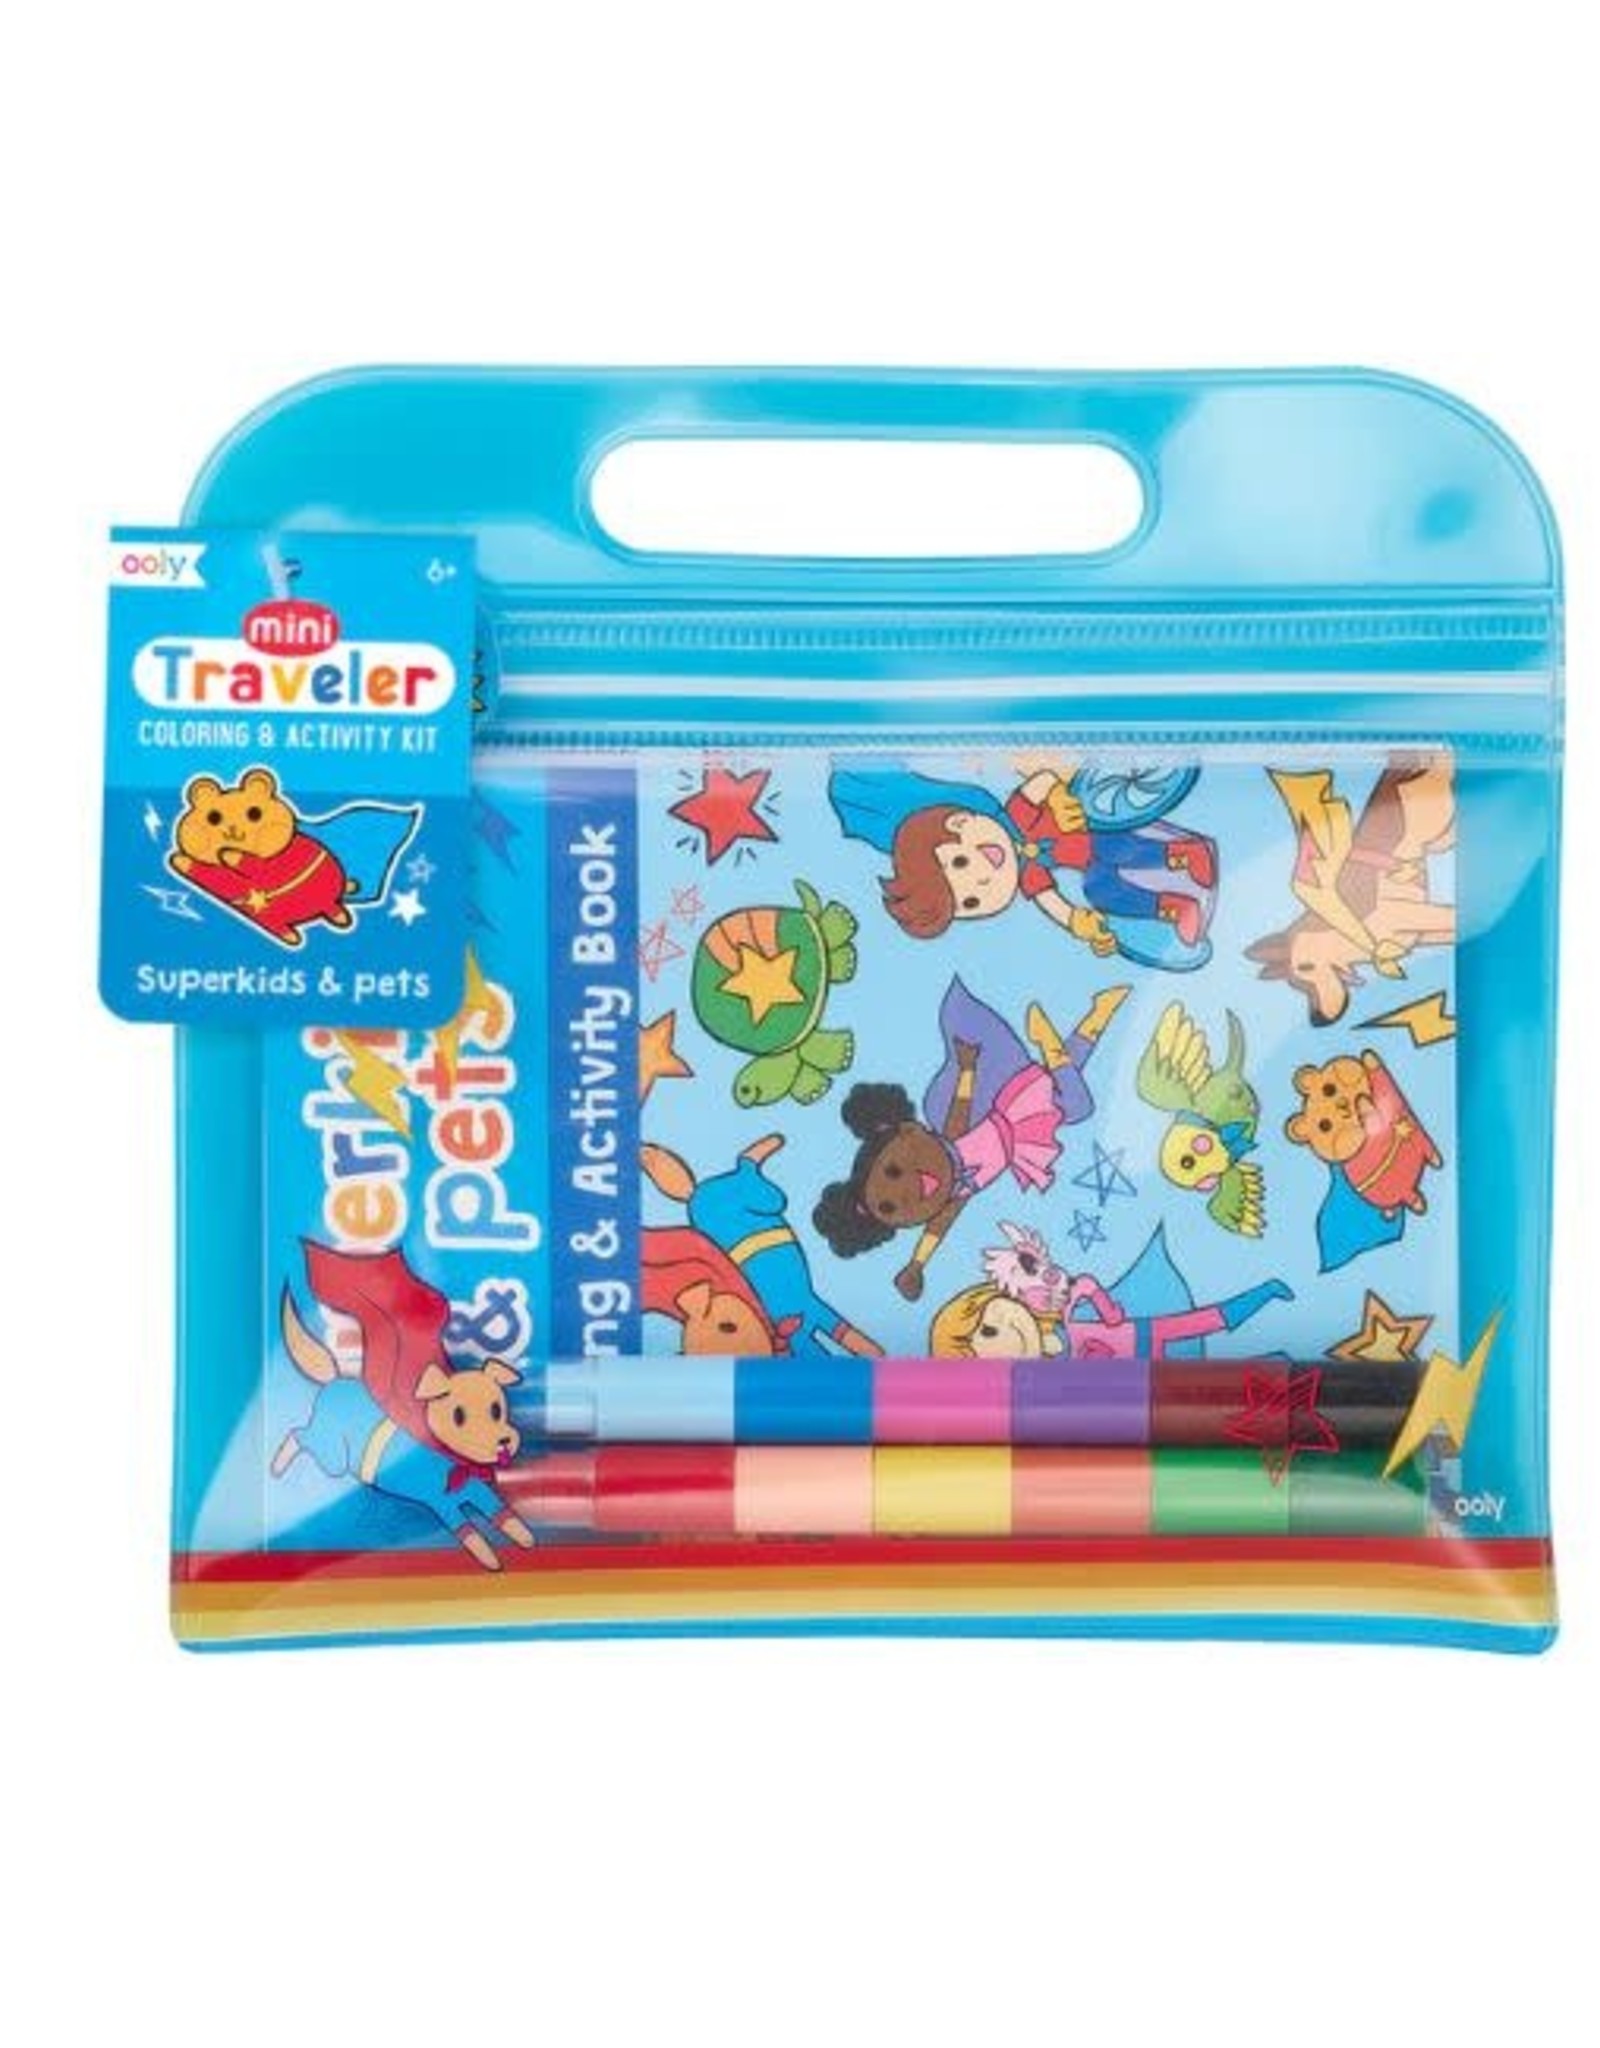 Ooly Mini Traveler Coloring and Activity kit - Superkids & Pets